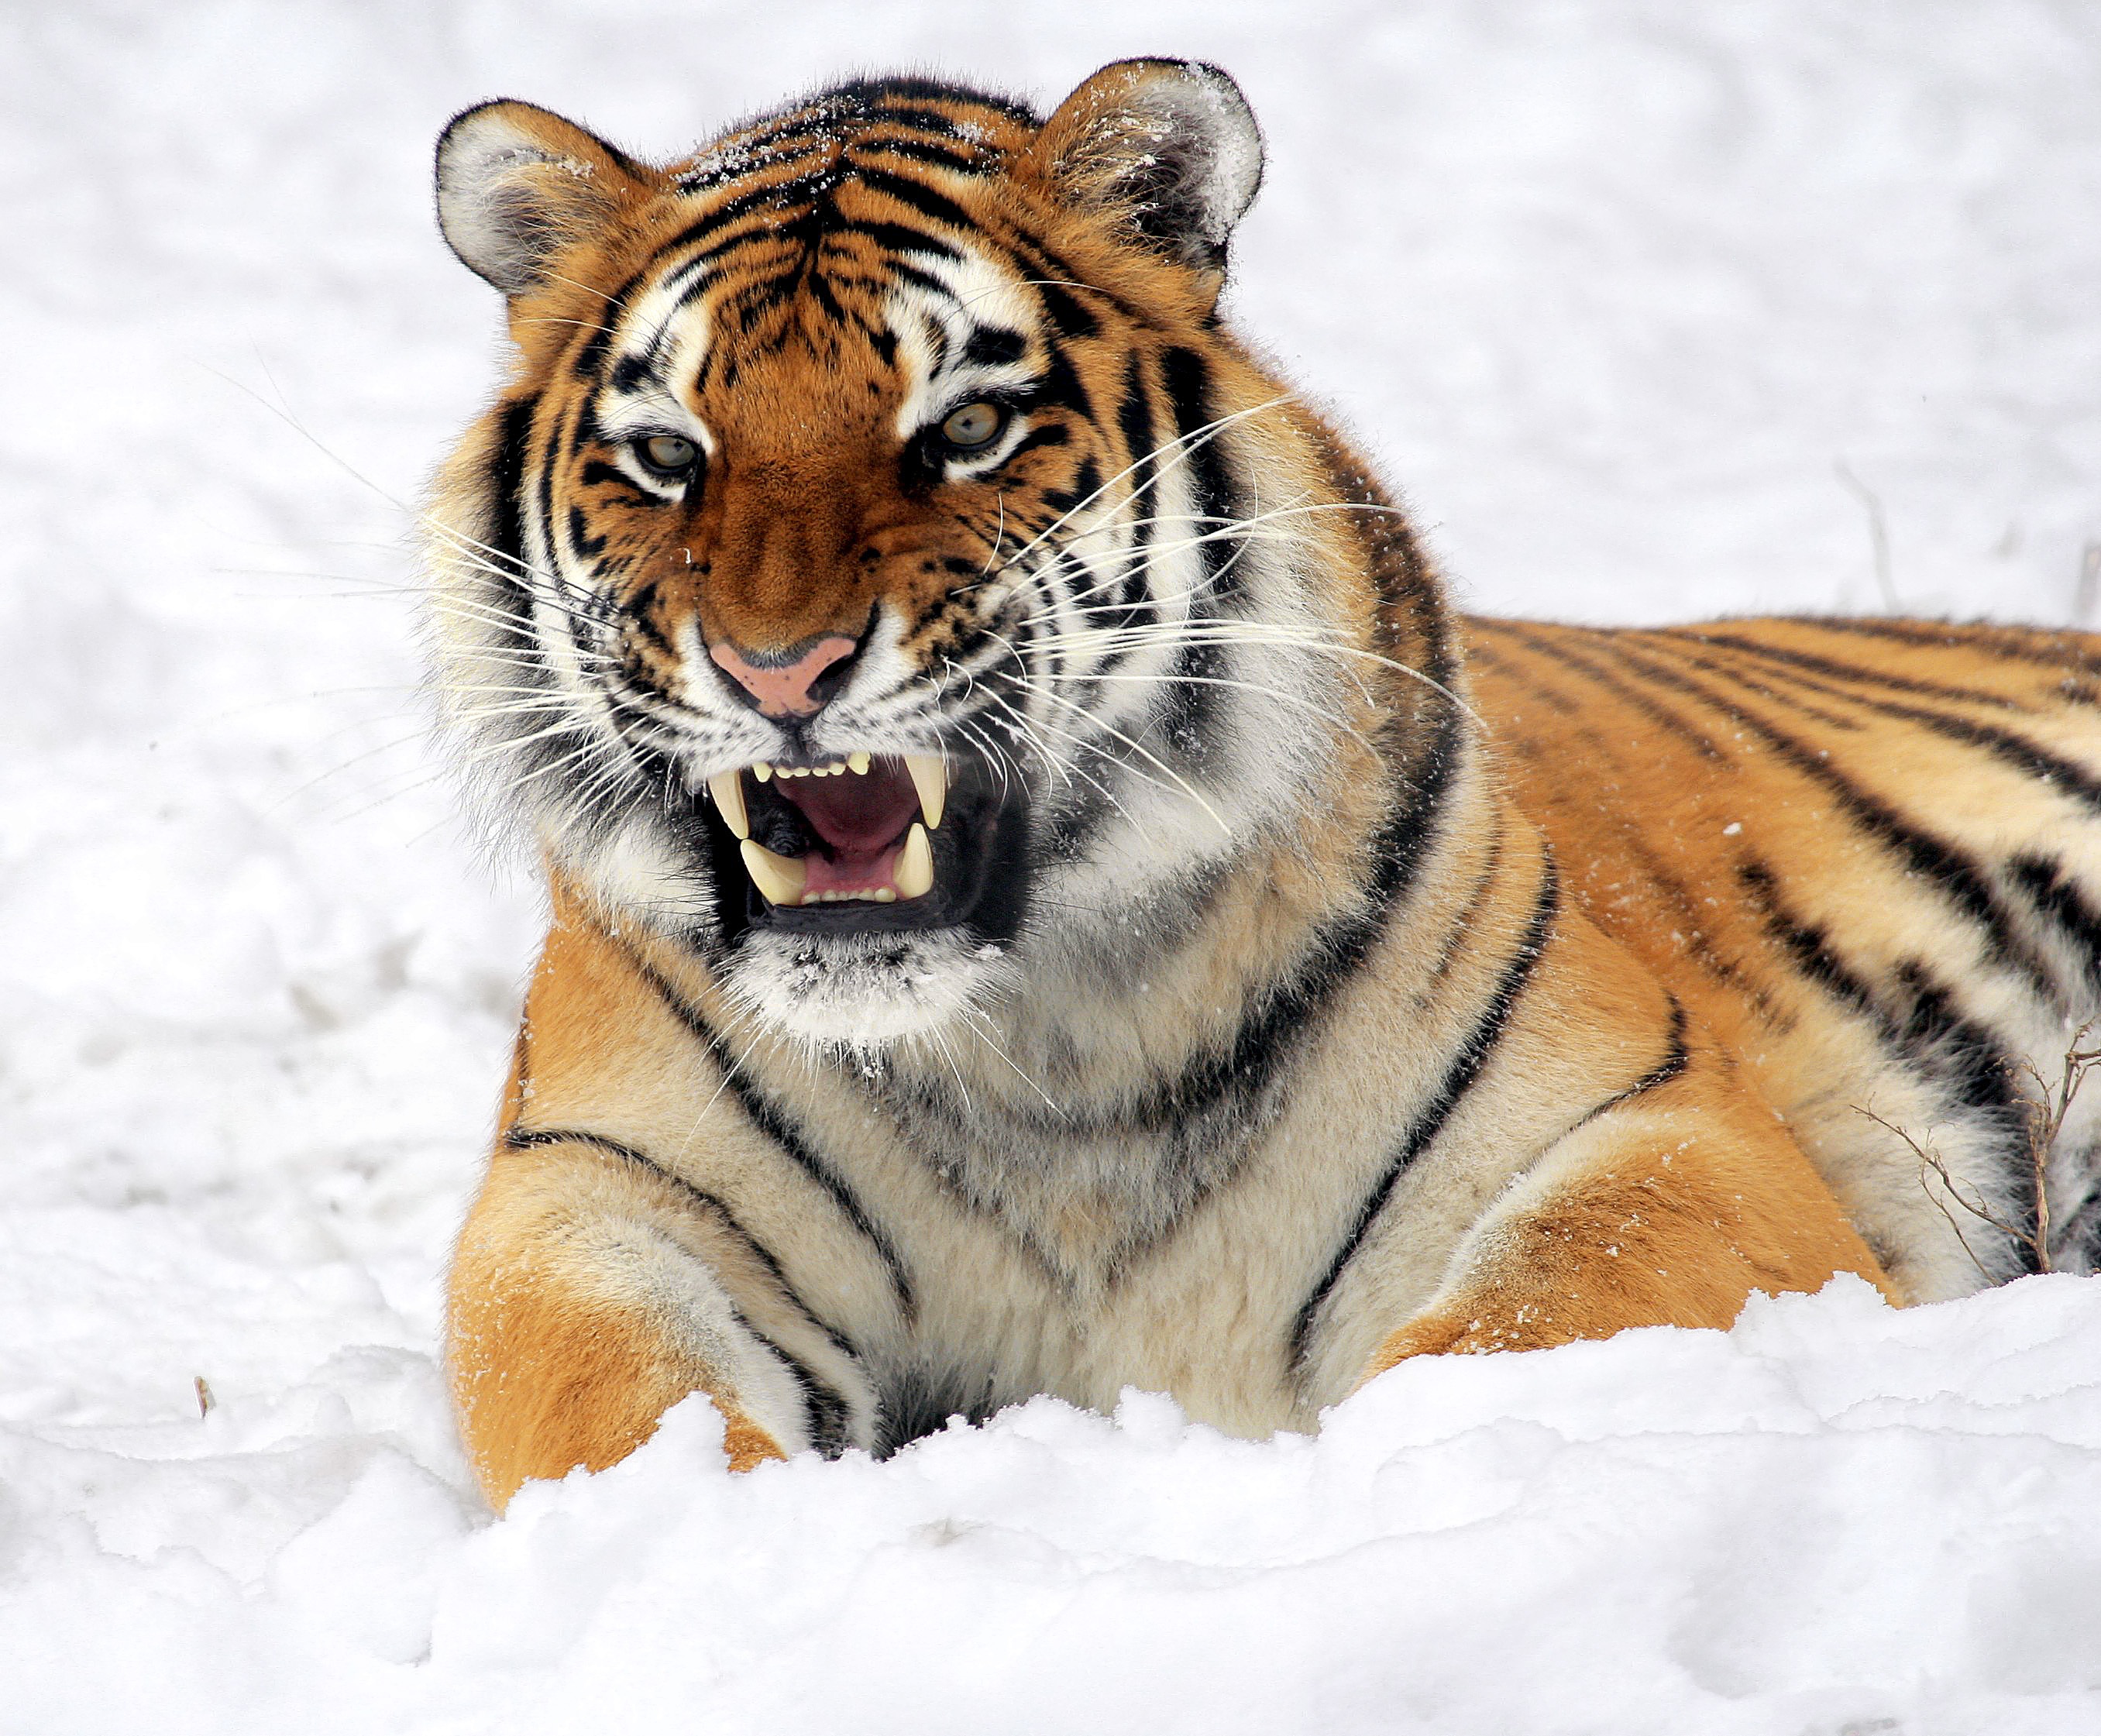 An angry tiger lying in the snow